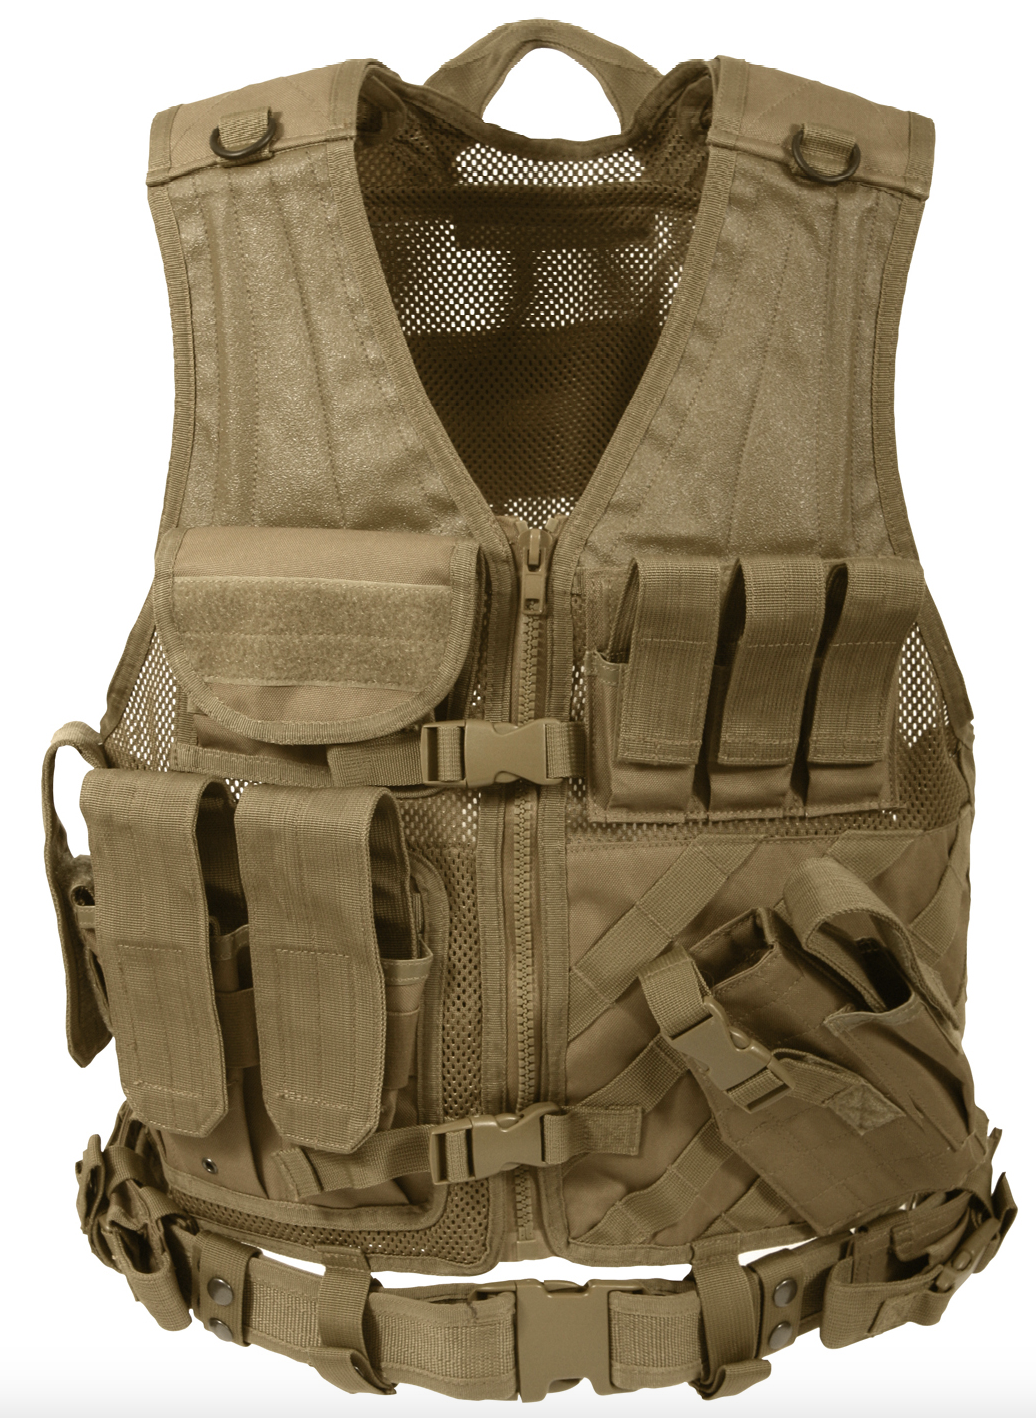 Rothco Cross Draw MOLLE Tactical Vest for Law Enforcement - ACU Digital Camo